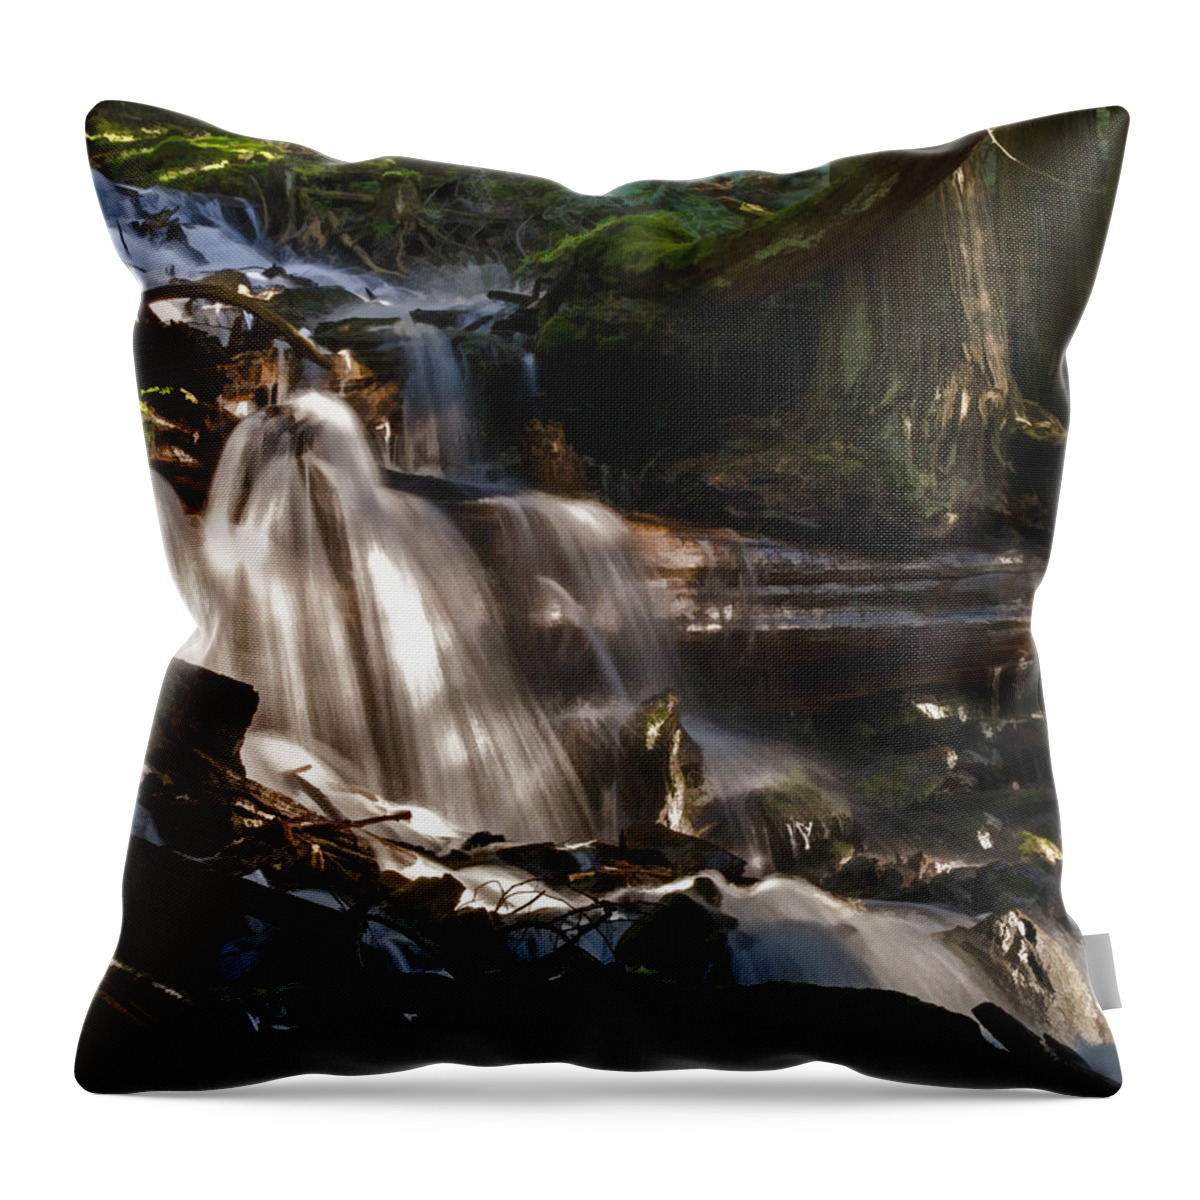 Life Begins To Flow Throw Pillow featuring the photograph Life Begins To Flow by Jordan Blackstone